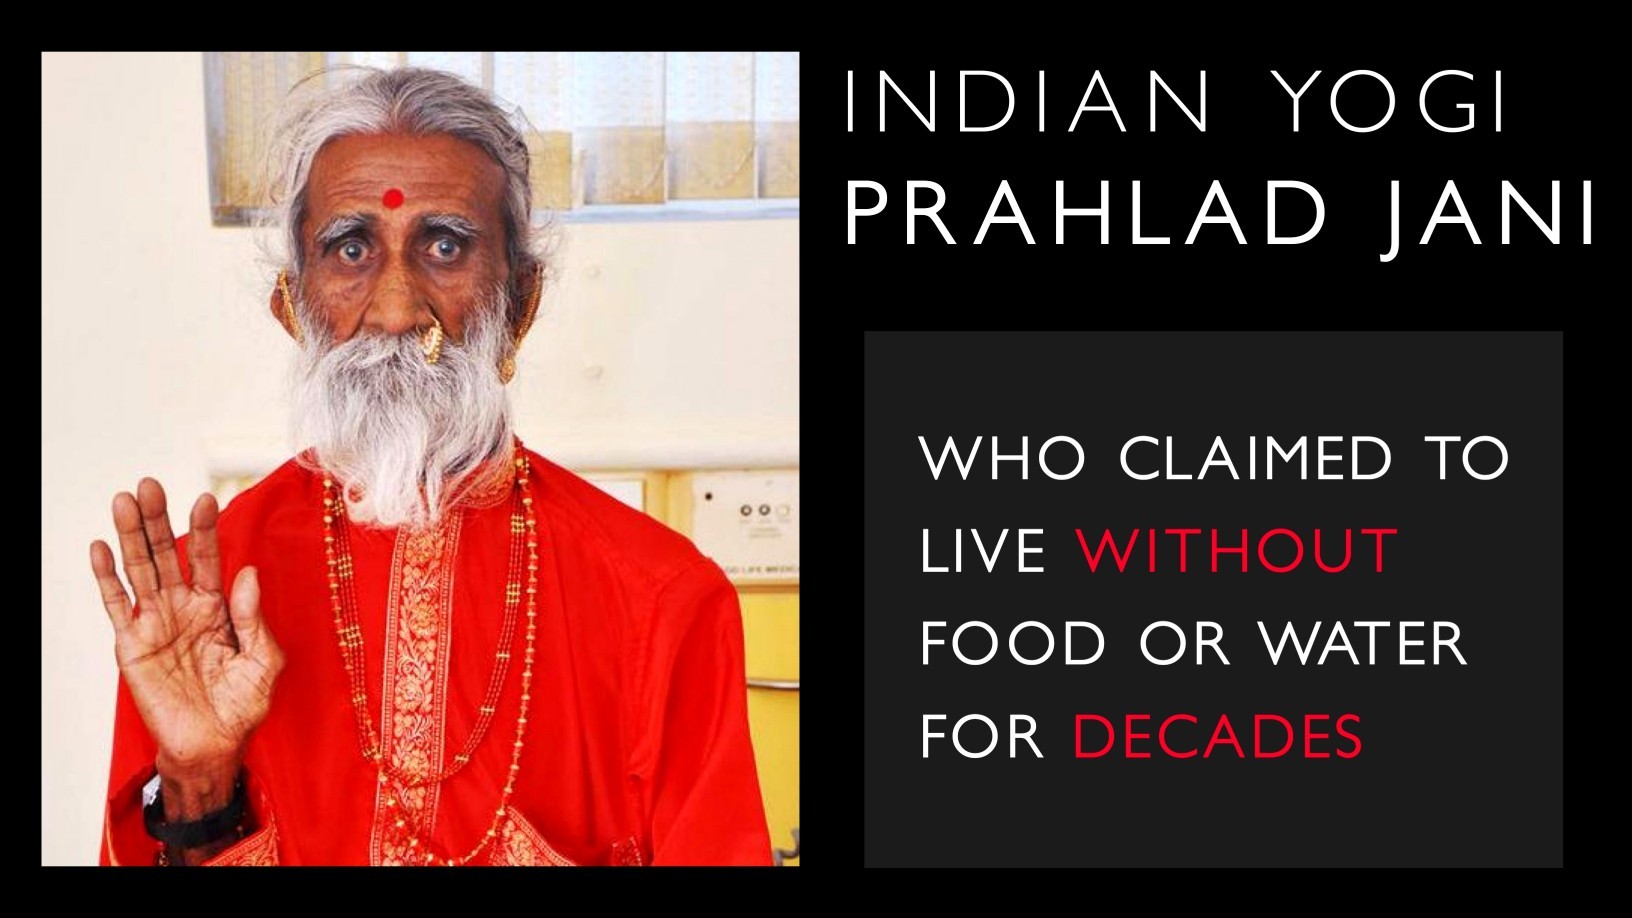 Prahlad Jani – The Indian yogi who claimed to live without food or water for decades 2